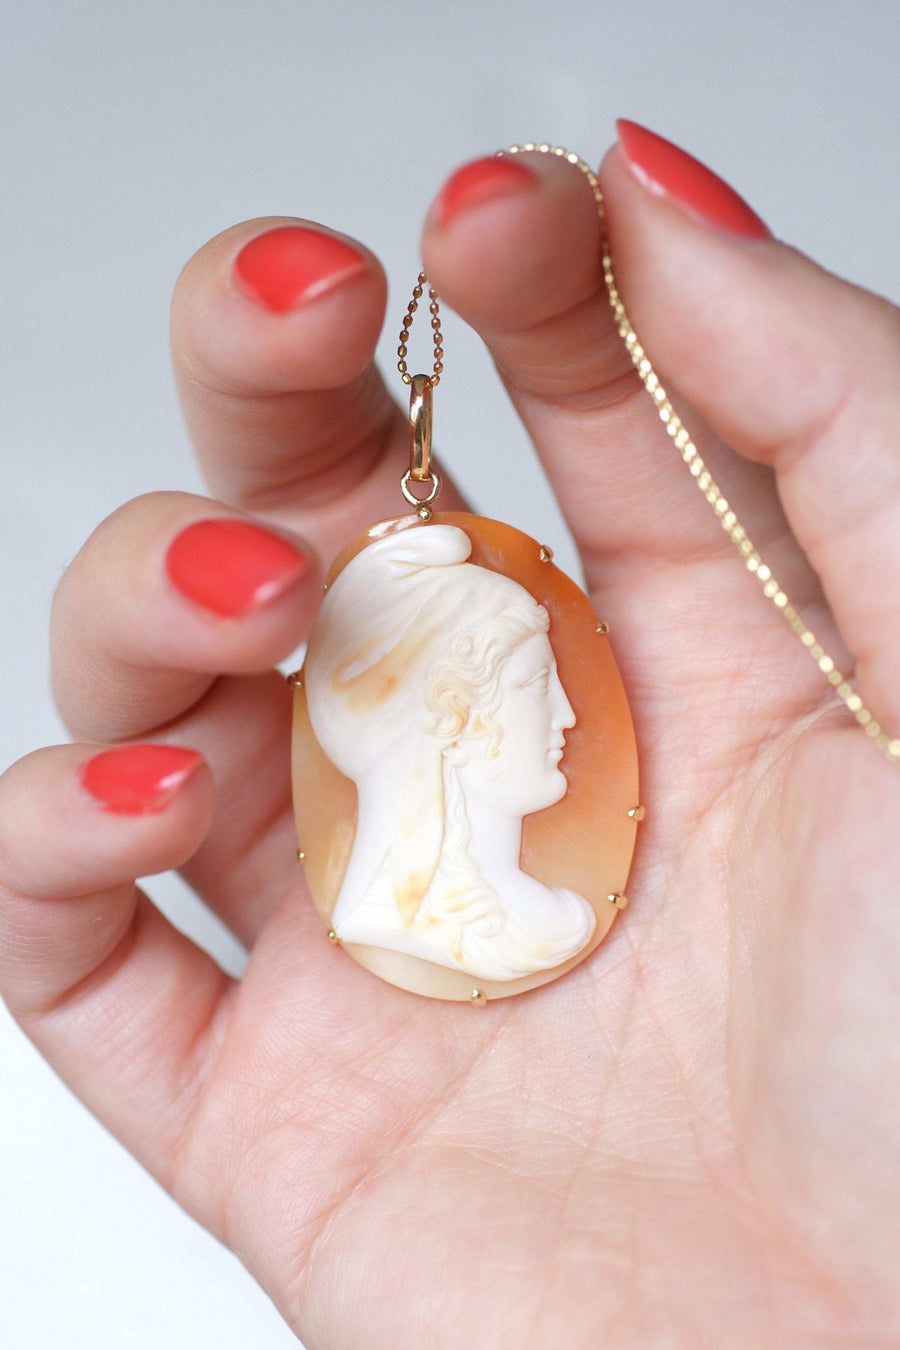 Marianne cameo shell pendant - Penelope Gallery